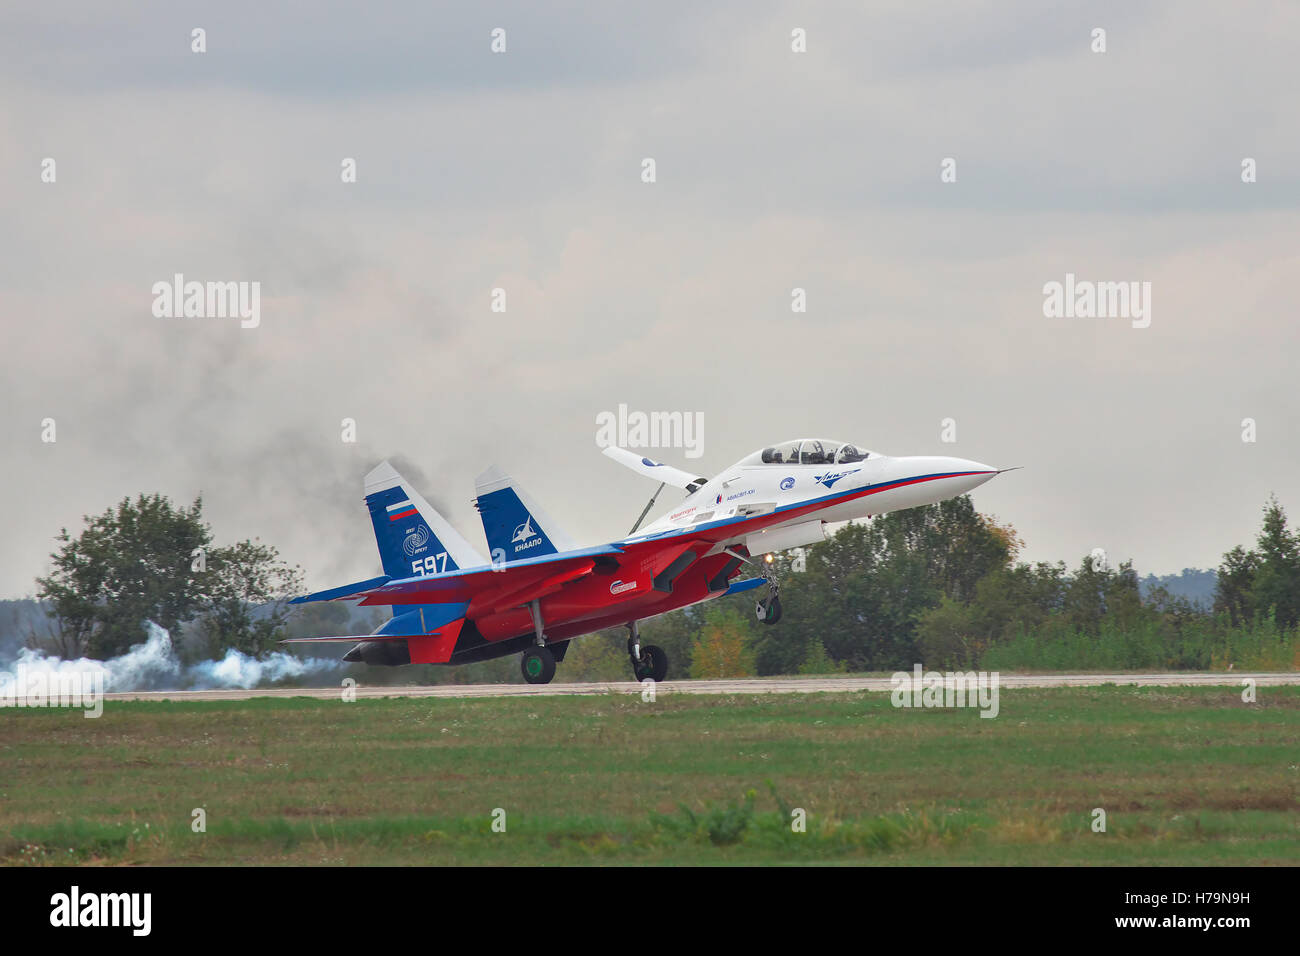 Kiev Region, Ukraine - October 2, 2010: Sukhoi Su-30LL fighter plane in Russian flag colors is landing with smoke on the runway Stock Photo